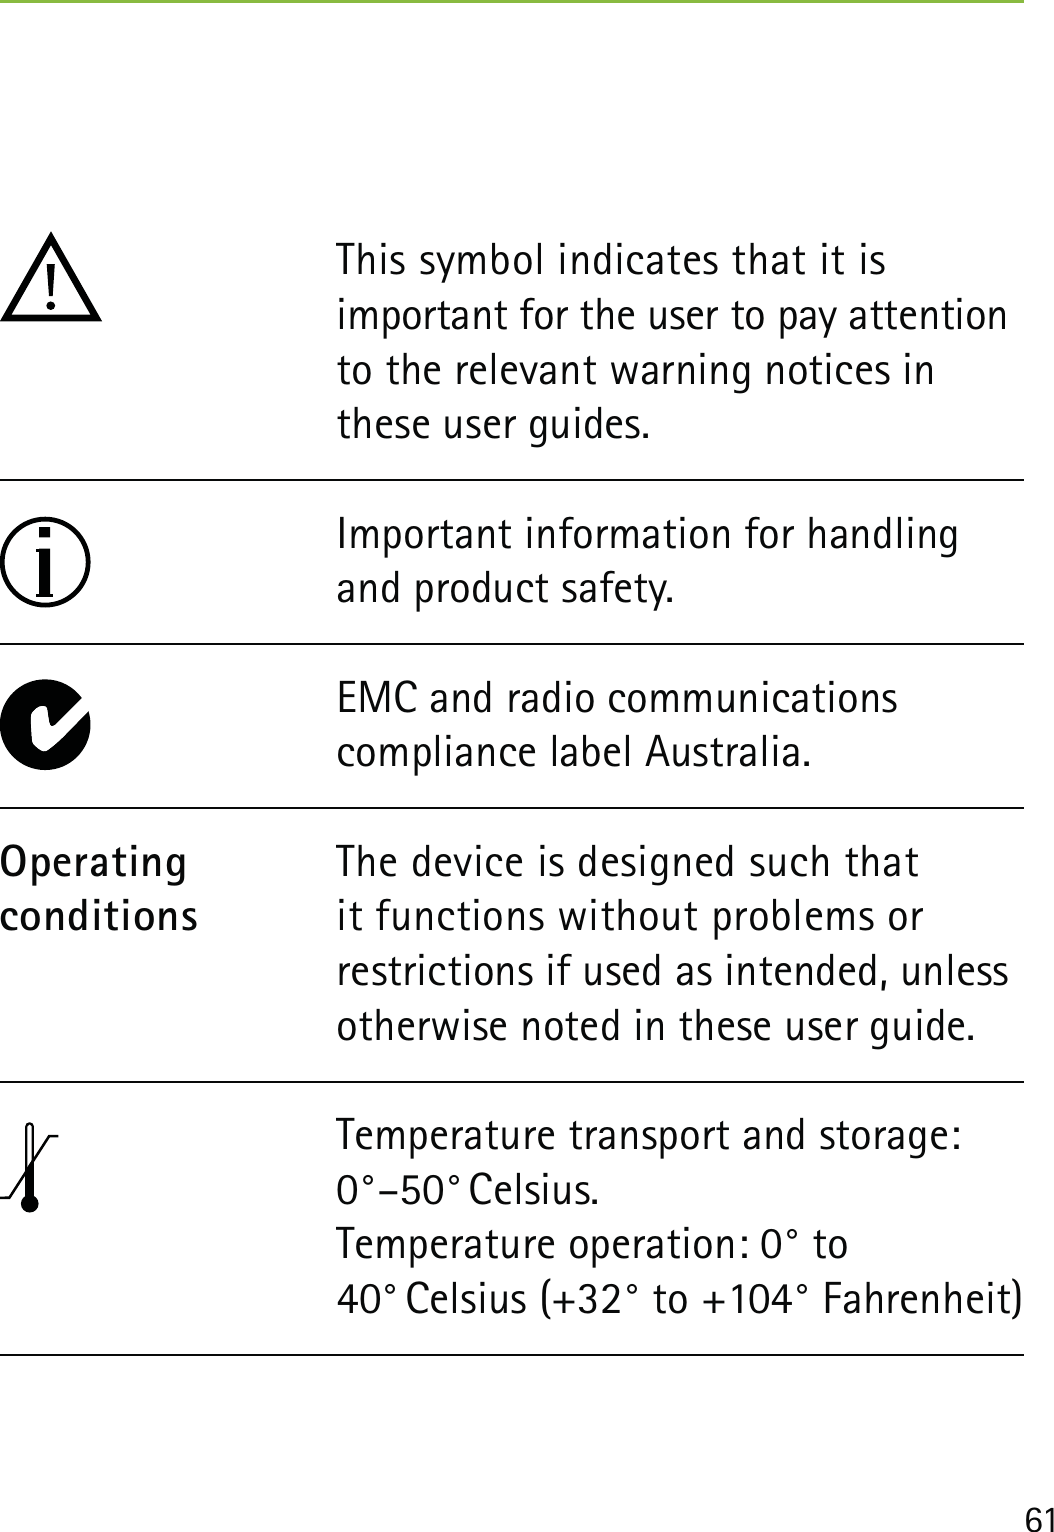 61The device is designed such that it functions without problems or restrictions if used as intended, unless otherwise noted in these user guide.OperatingconditionsImportant information for handling and product safety.This symbol indicates that it is  important for the user to pay attention to the relevant warning notices in these user guides.EMC and radio communications  compliance label Australia.Temperature transport and storage: 0°–50° Celsius. Temperature operation: 0° to  40° Celsius (+32° to +104° Fahrenheit)